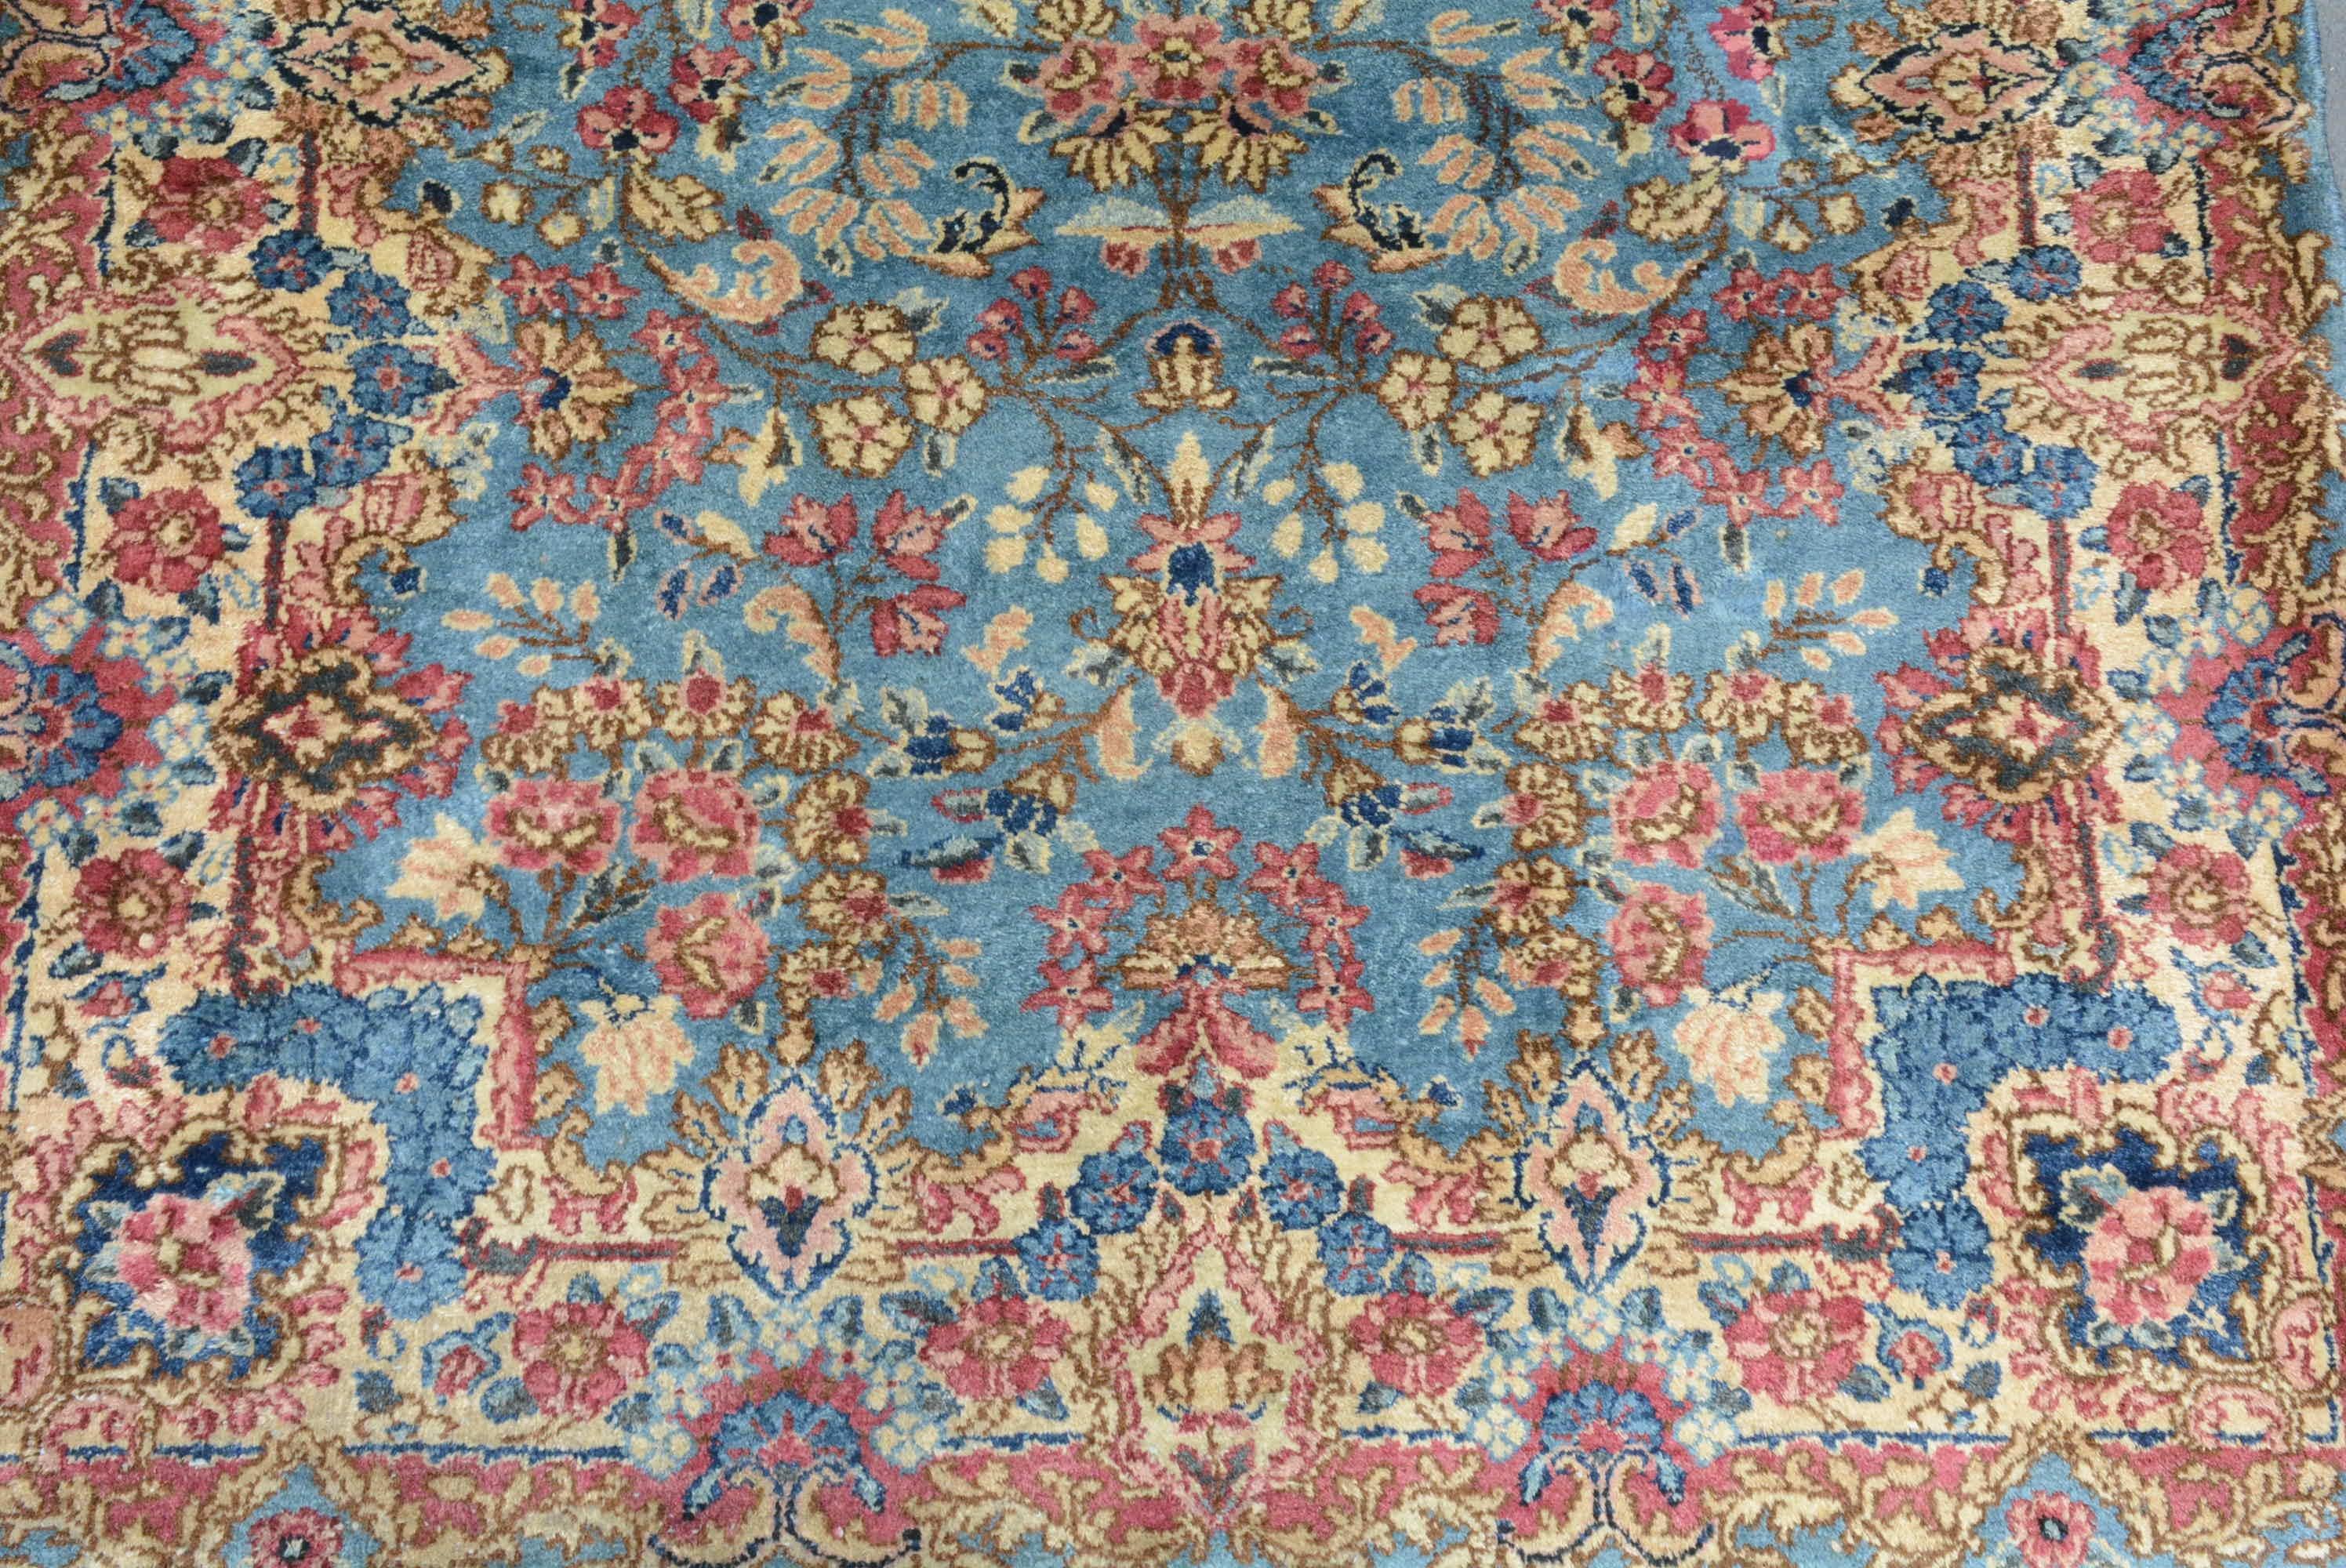 The city and province of Kerman is geographically isolated in the great desert of southern Persia. An industry of both shawl and carpet production has flourished there since the Safavid Dynasty of the sixteenth century. Carpets produced here, once